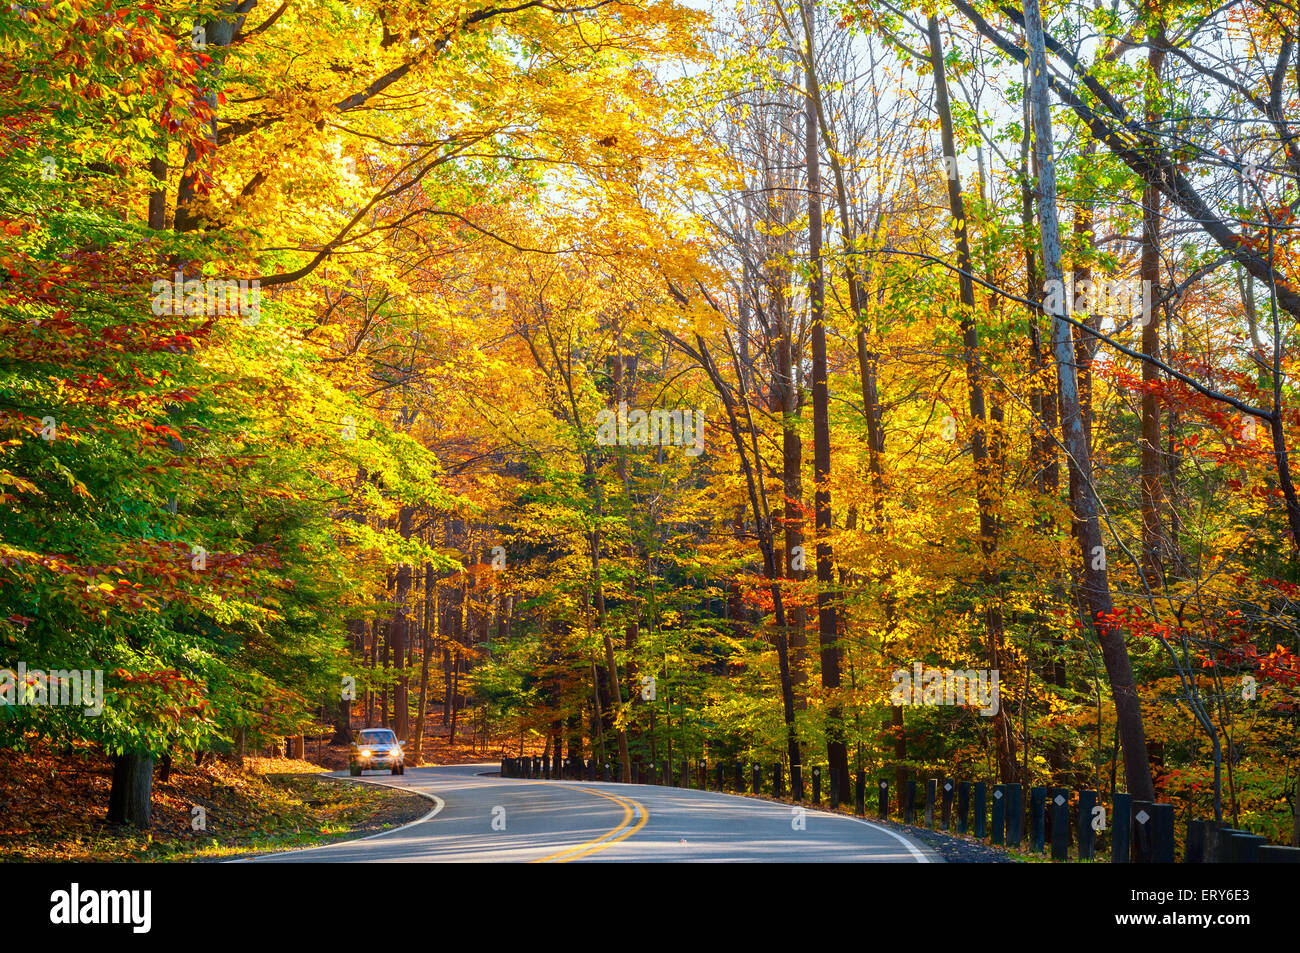 A small truck approaches on curvy road climbing through a sunlit autumn woods. Stock Photo